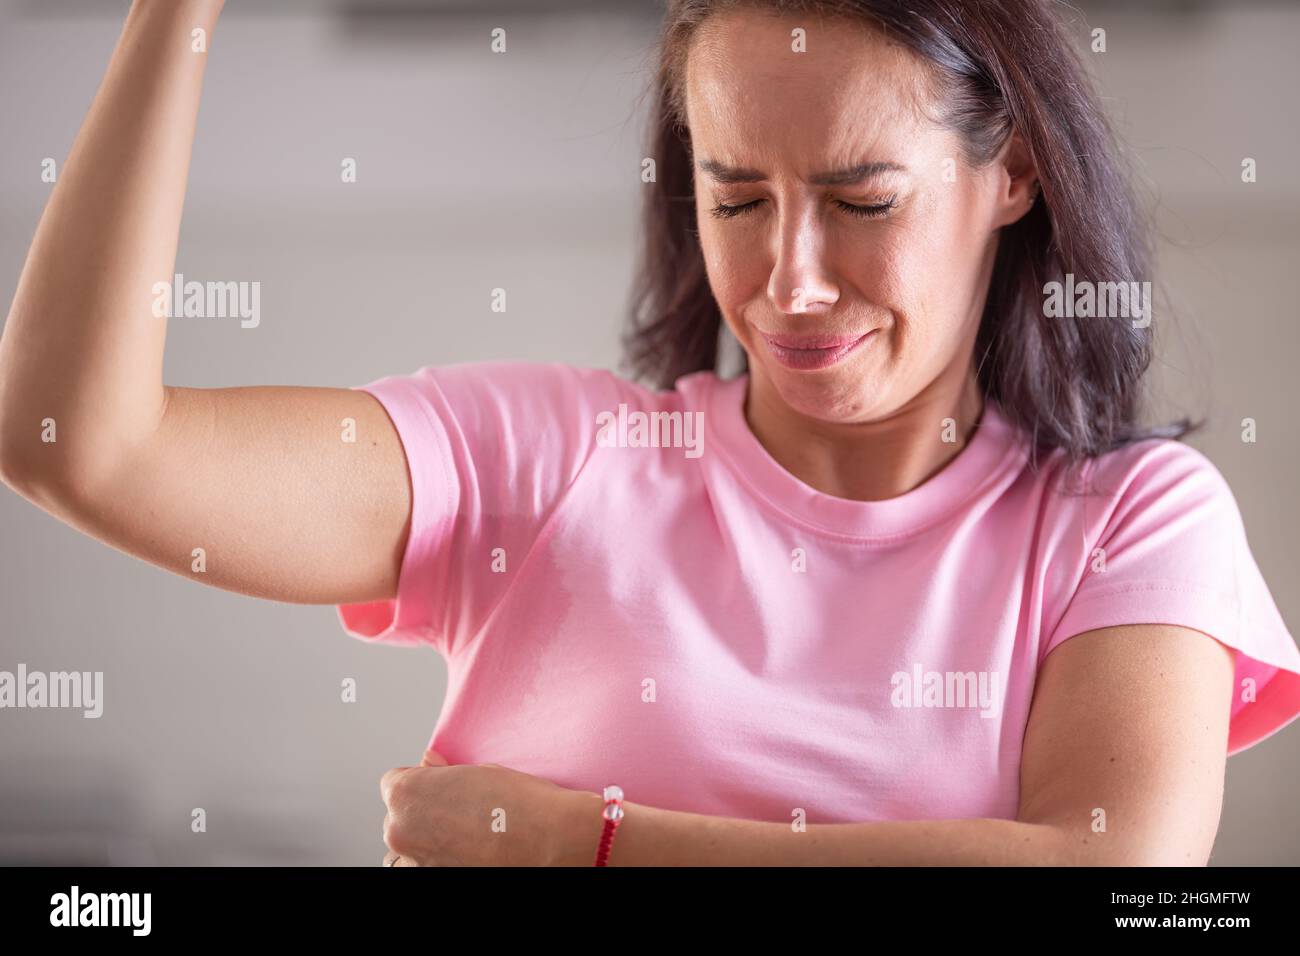 Woman Smells Herself With Repulsive Facial Expression And Sweat Patches On Her Pink Shirt Stock